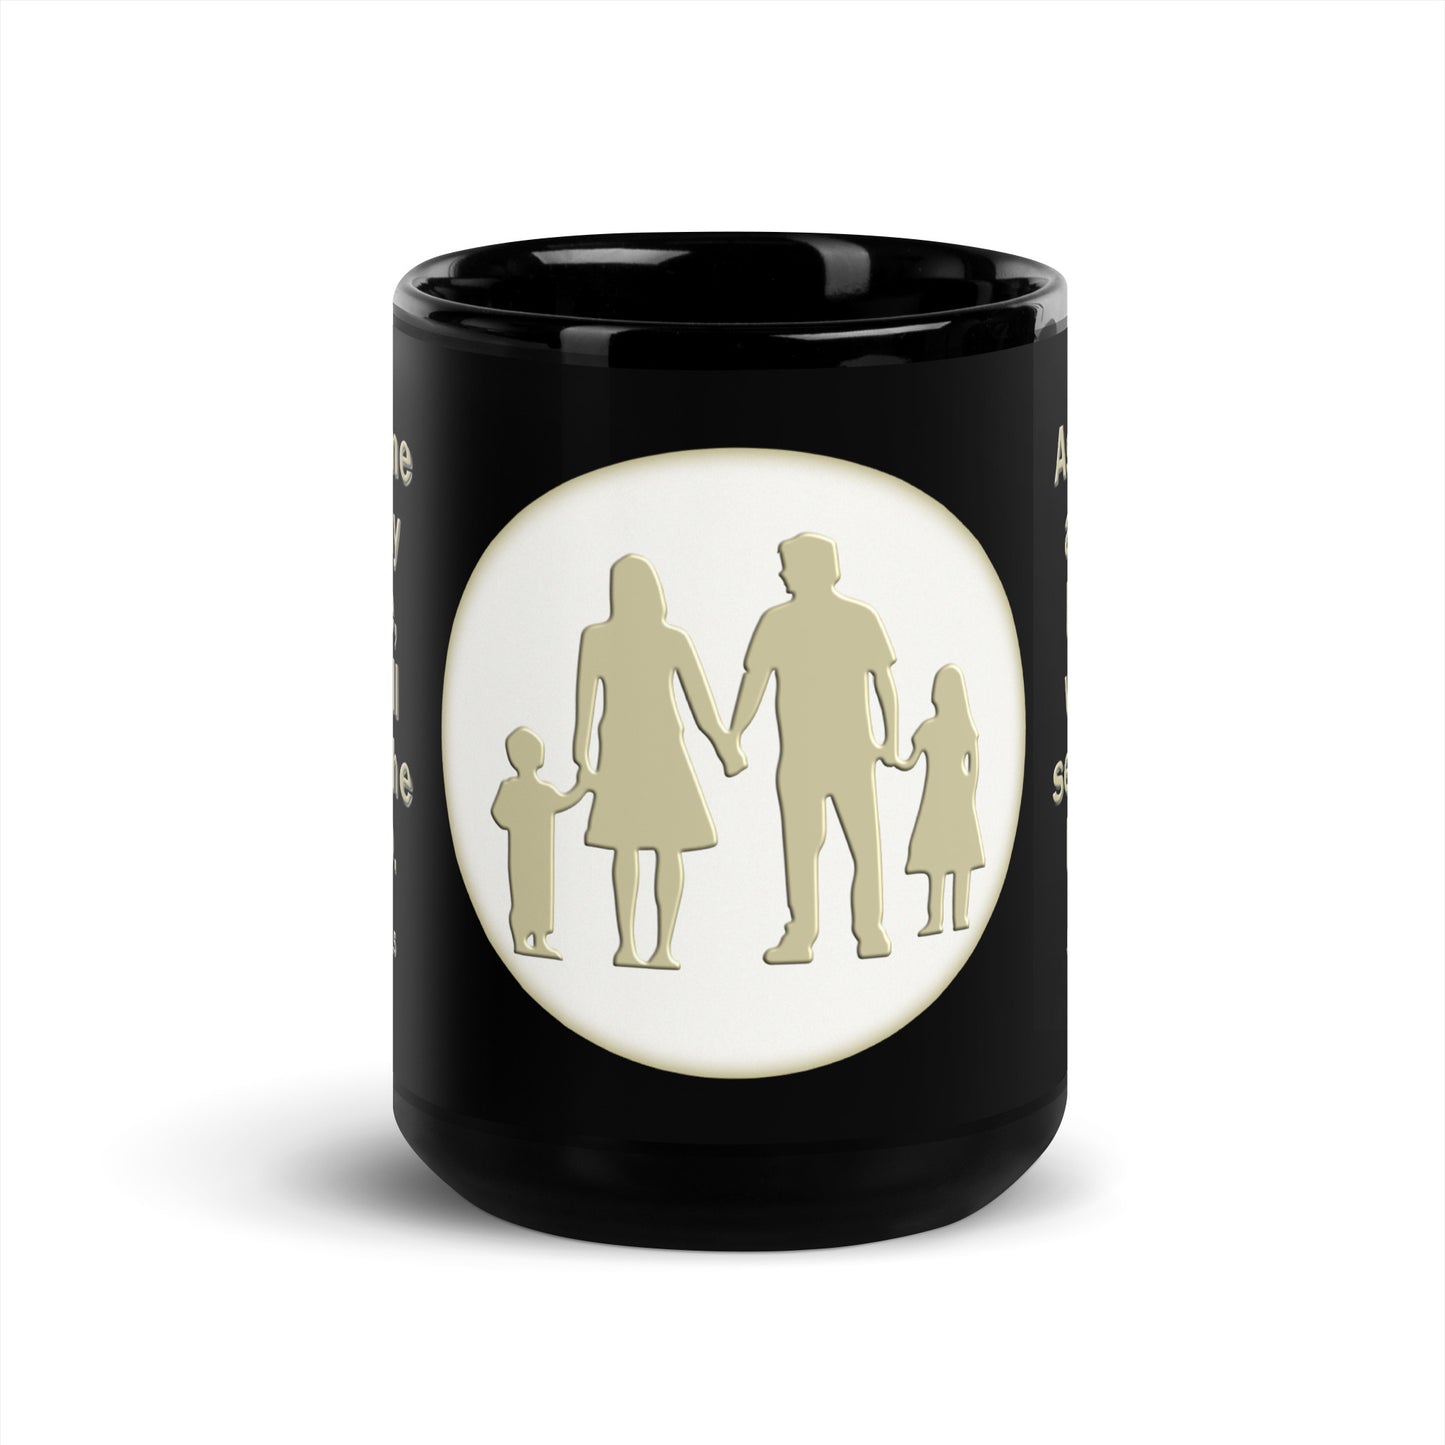 A014 Mug - Black Glossy Ceramic Mug Featuring a Silhouette Graphic of a Young Family with the Text of Joshua 24 verse 15 “As for Me and My House, We Will Serve the LORD.”